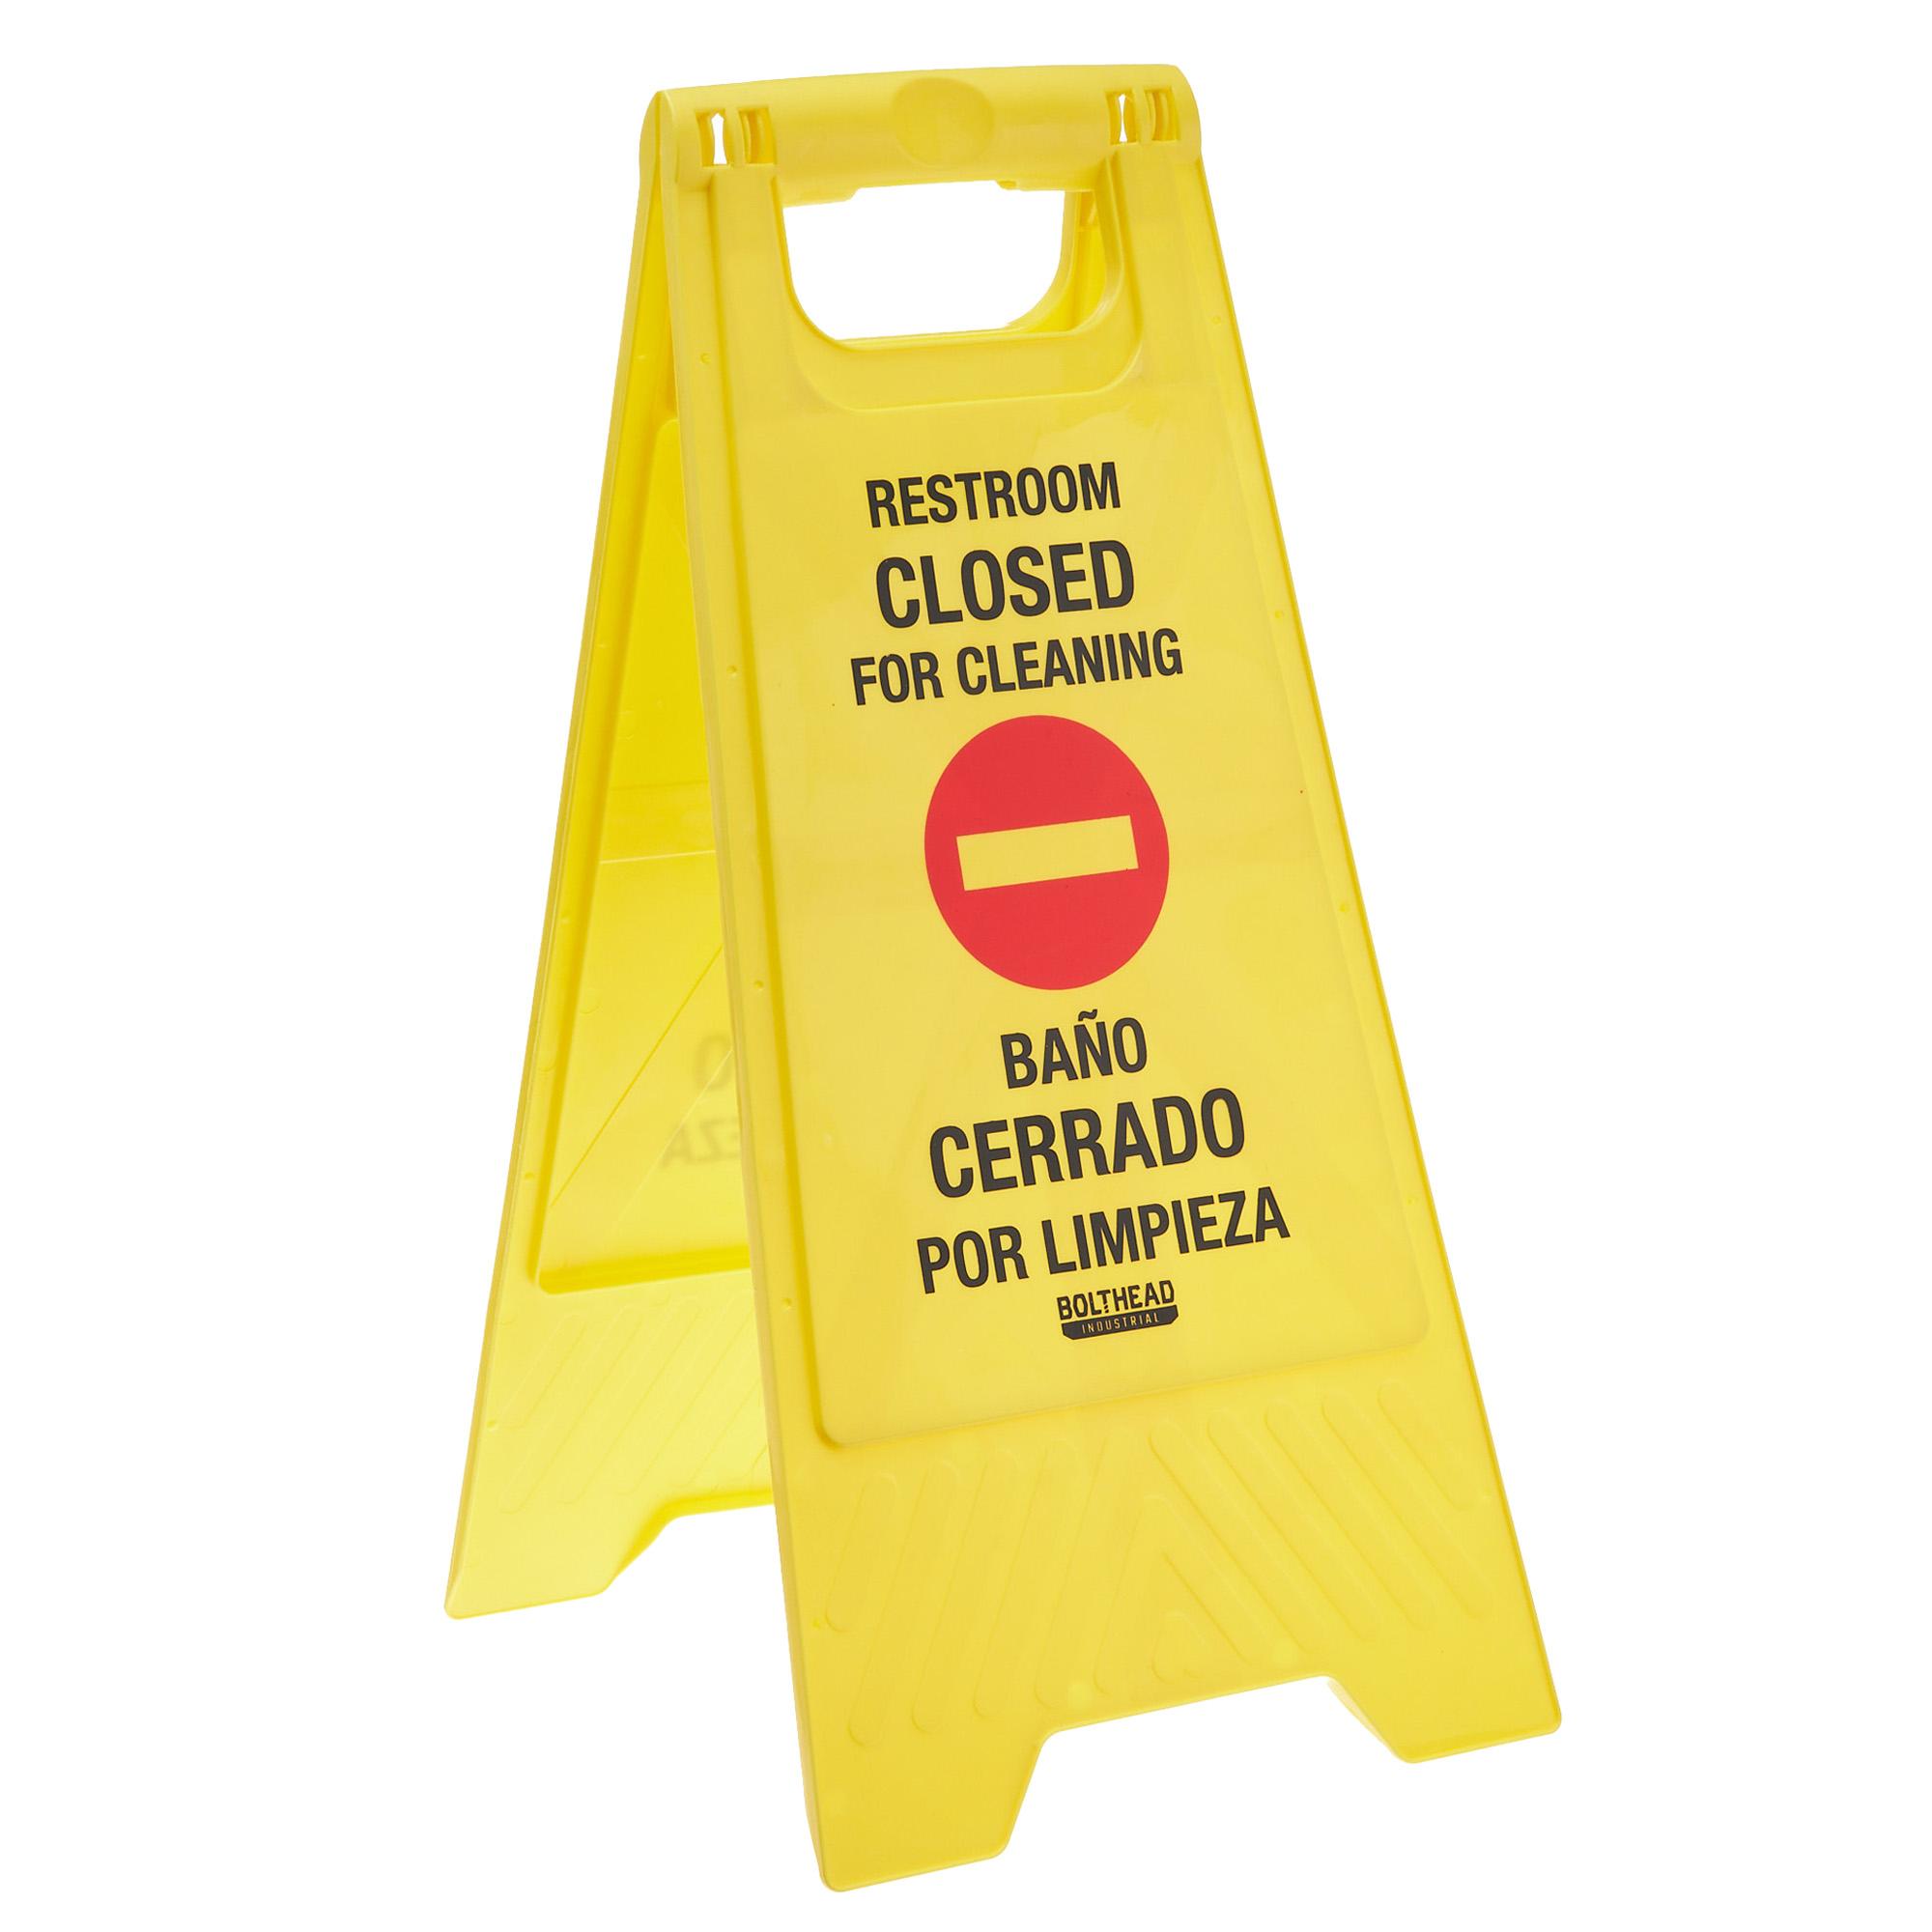 Restroom Closed for Cleaning - A-Frame Floor Sign, Bilingual